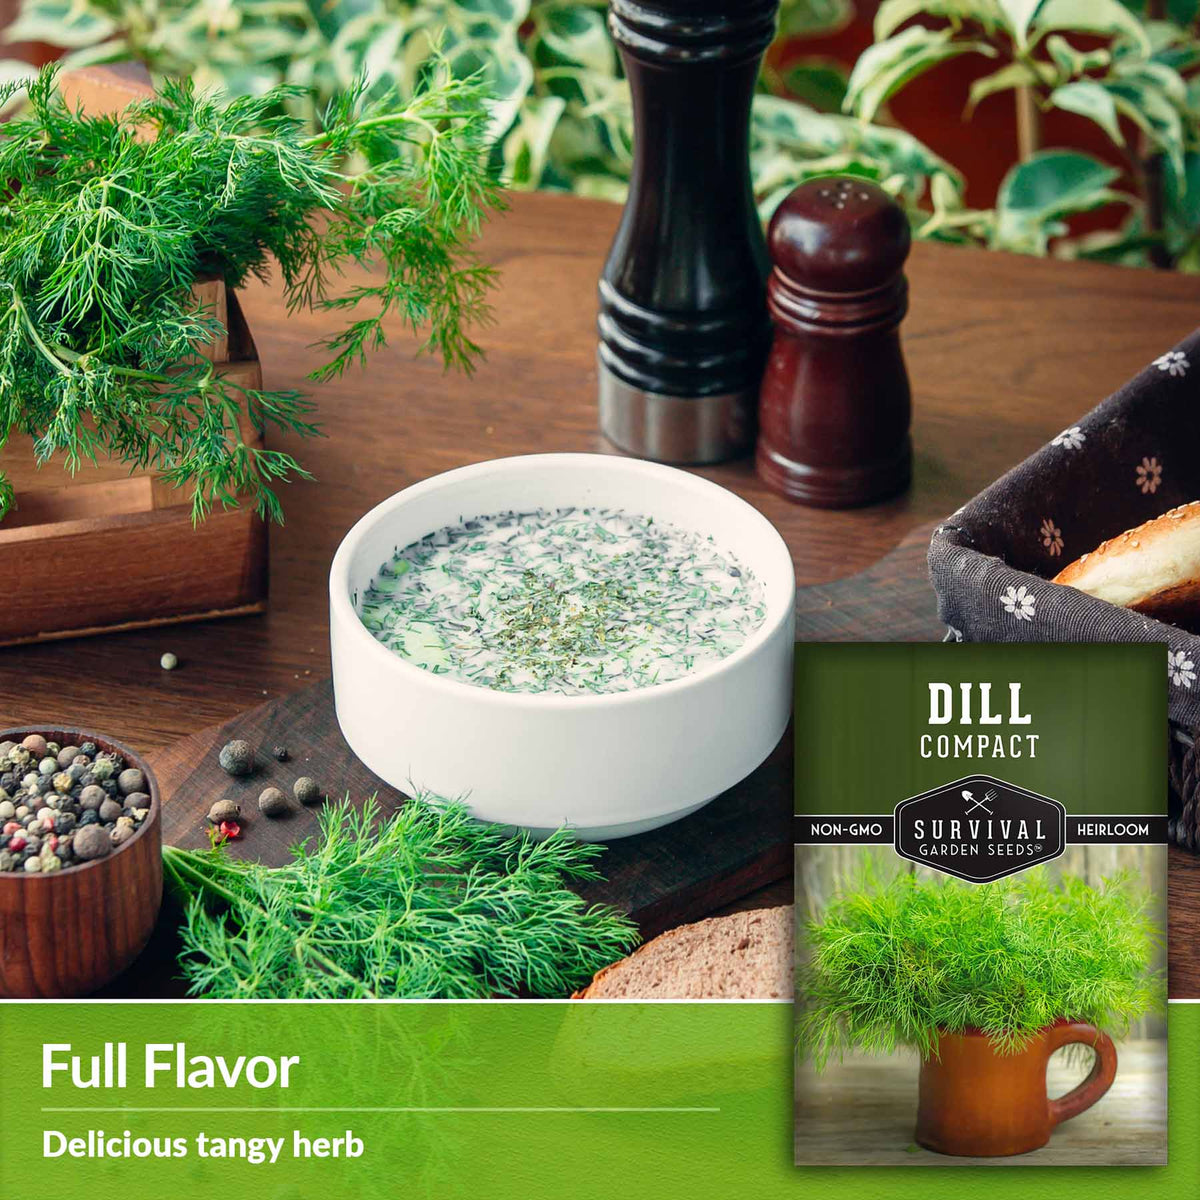 Full flavor - delicious tangy herb